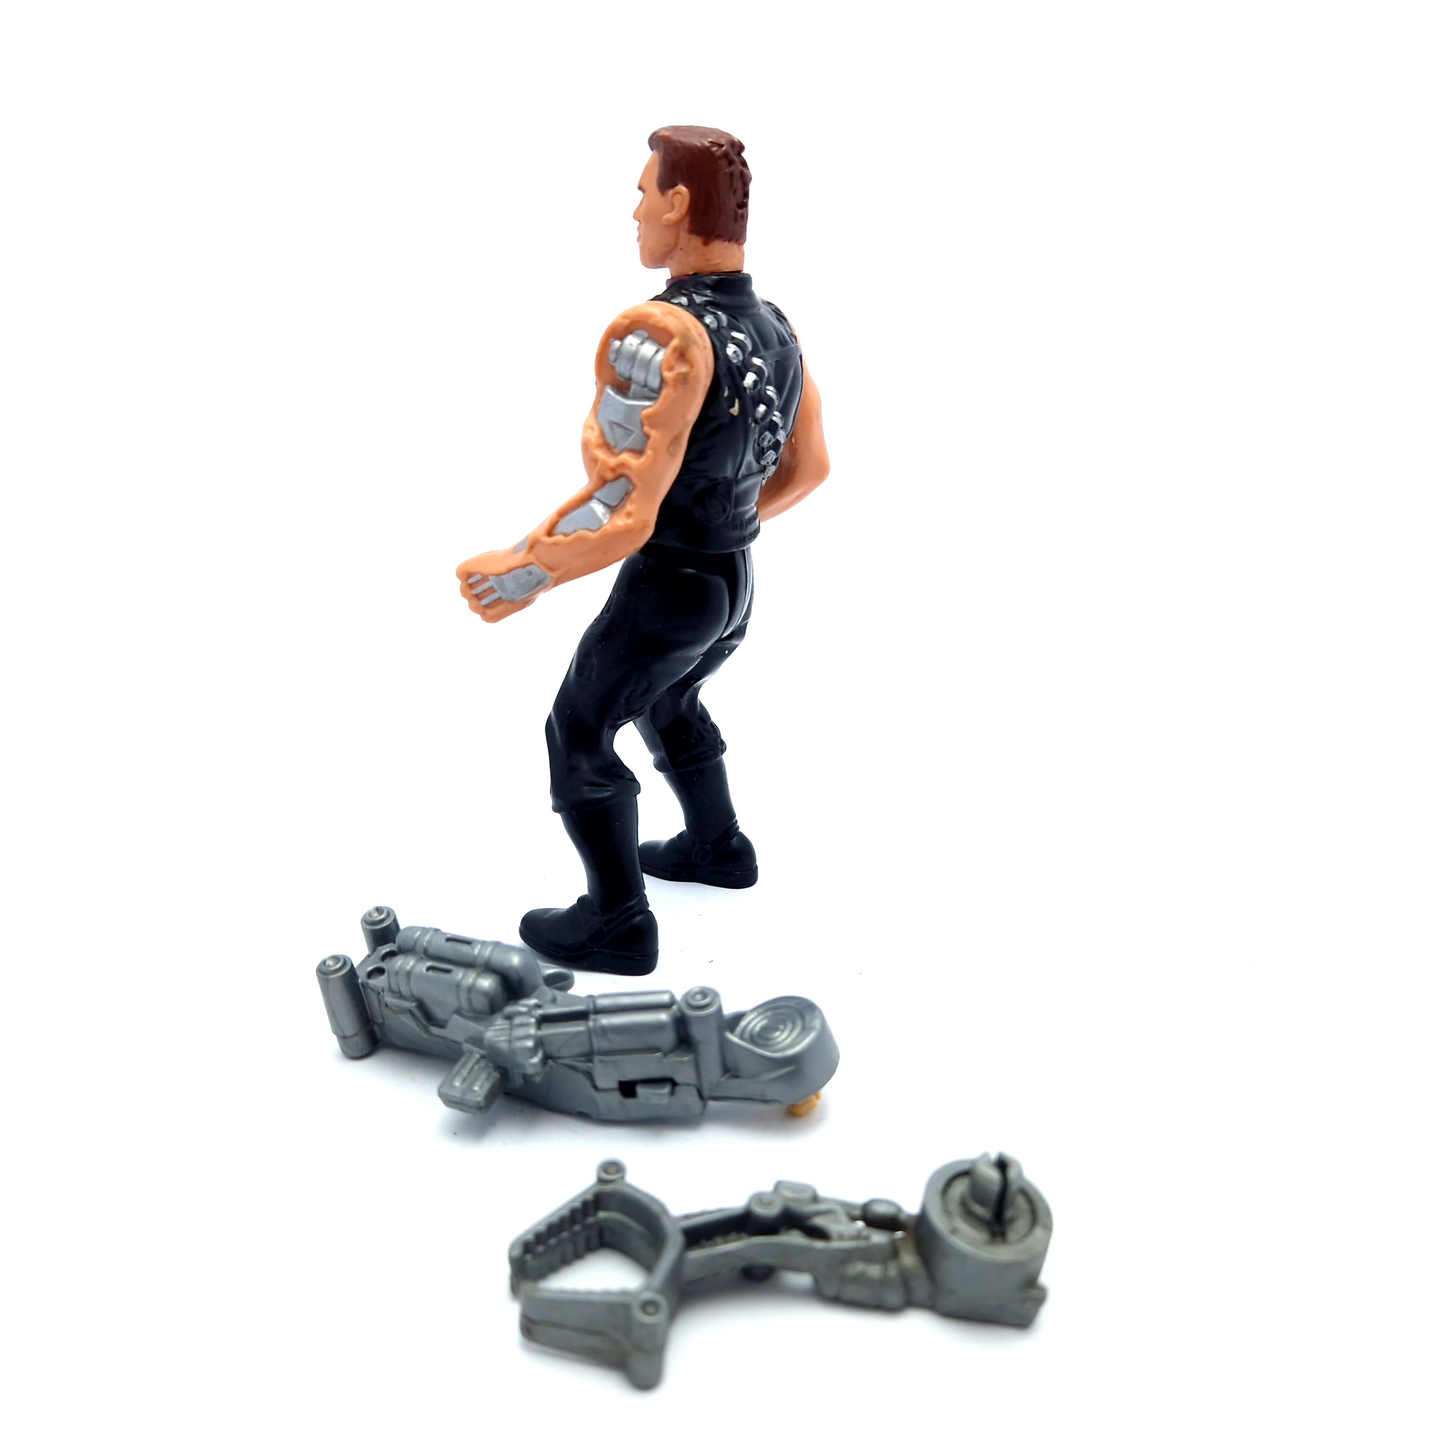 TERMINATOR 2 ☆ POWER ARM Action Figure Near Complete ☆ Vintage 90s Kenner Loose